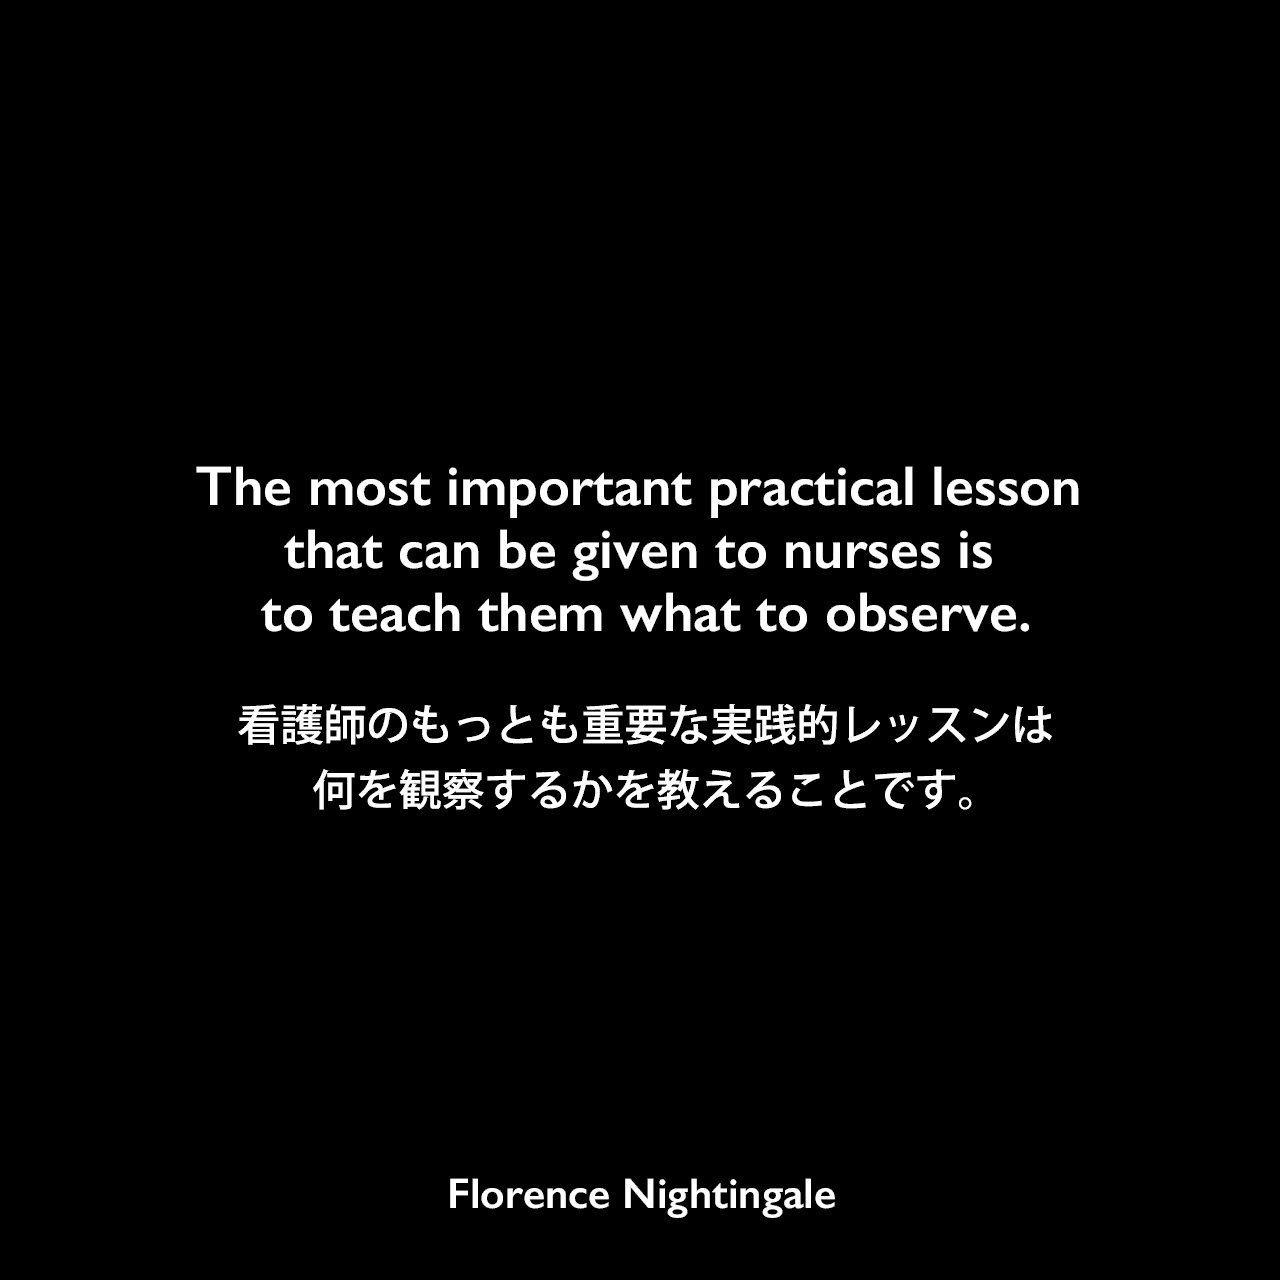 The most important practical lesson that can be given to nurses is to teach them what to observe.看護師のもっとも重要な実践的レッスンは、何を観察するかを教えることです。Florence Nightingale